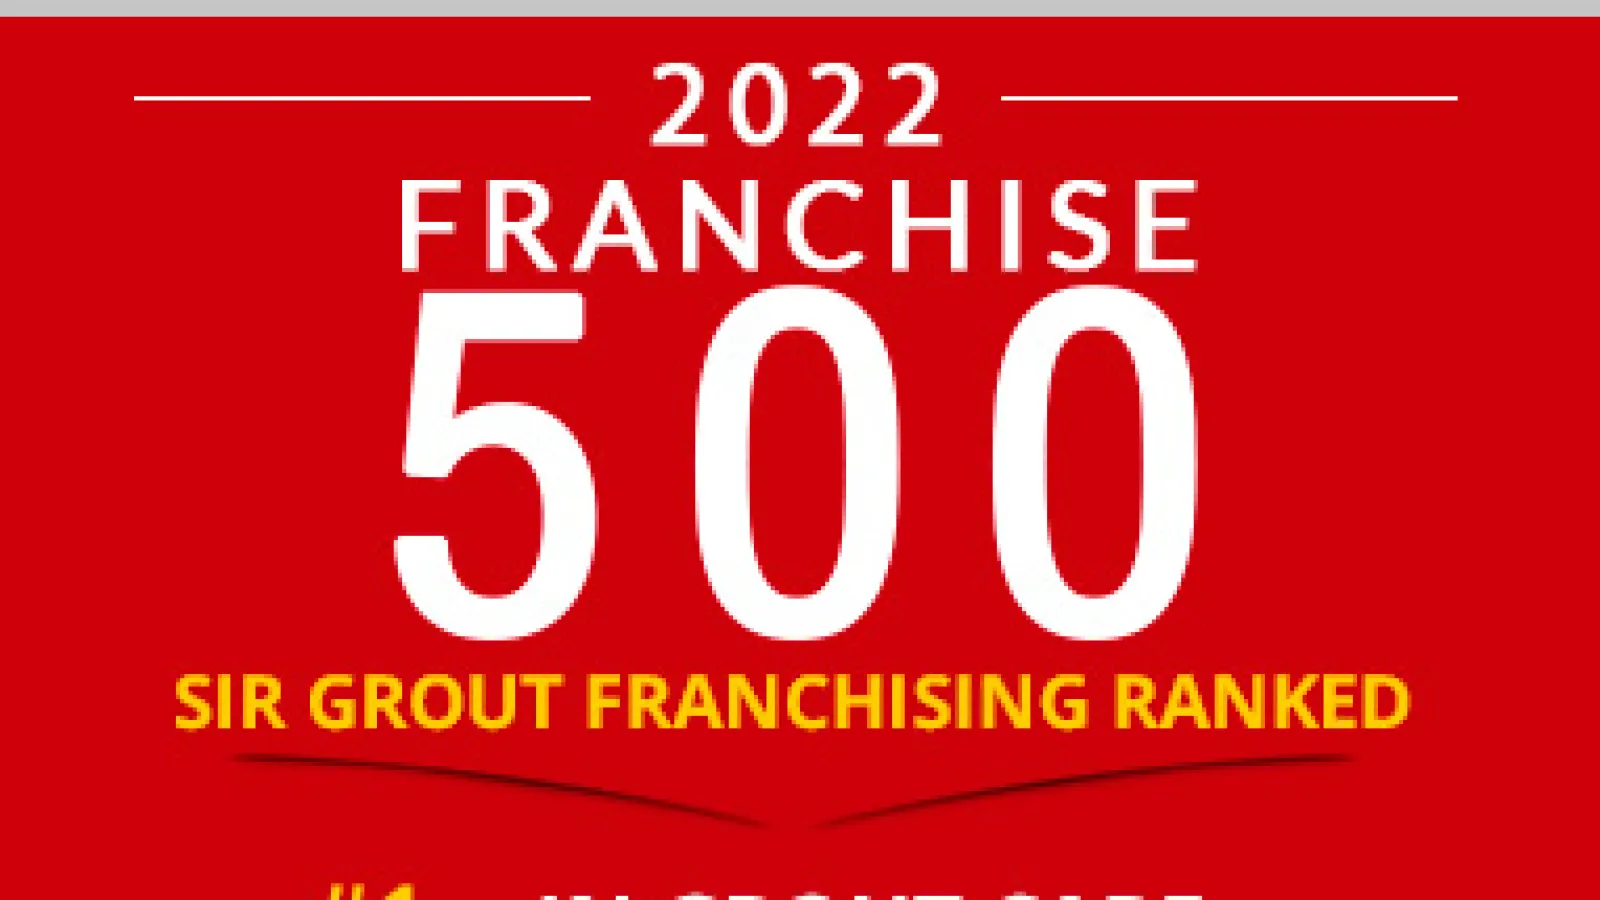 Sir Grout Franchise Earns Top Ranking Spot for Grout Care on Entrepreneur Magazine's Franchise 500 List for 2022